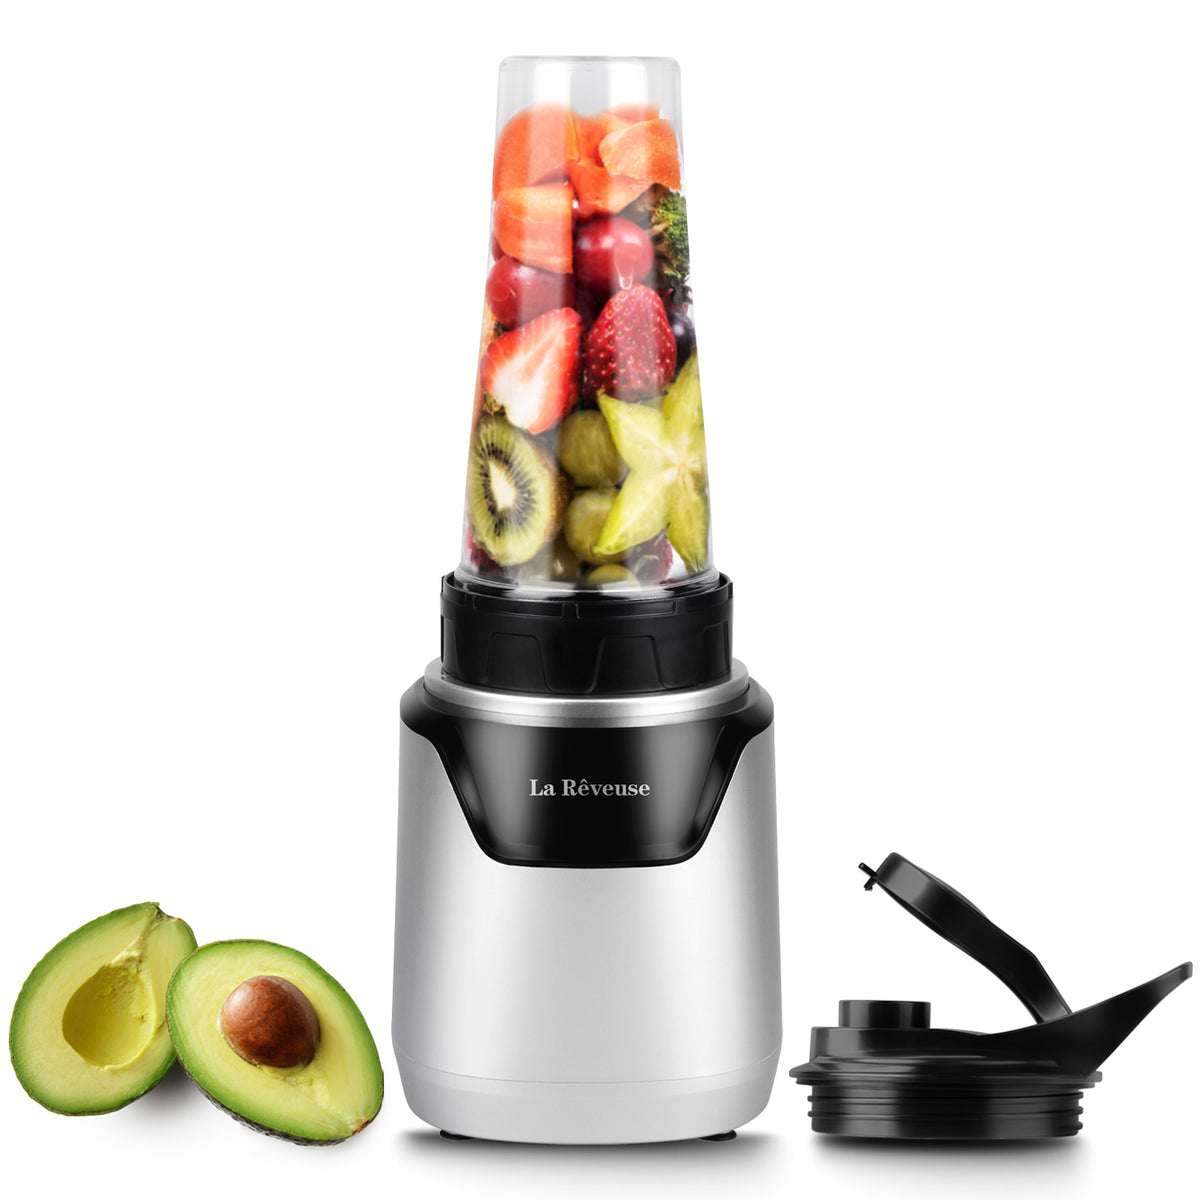 La Reveuse Personal Blender for Shakes and Smoothies 500 Watts